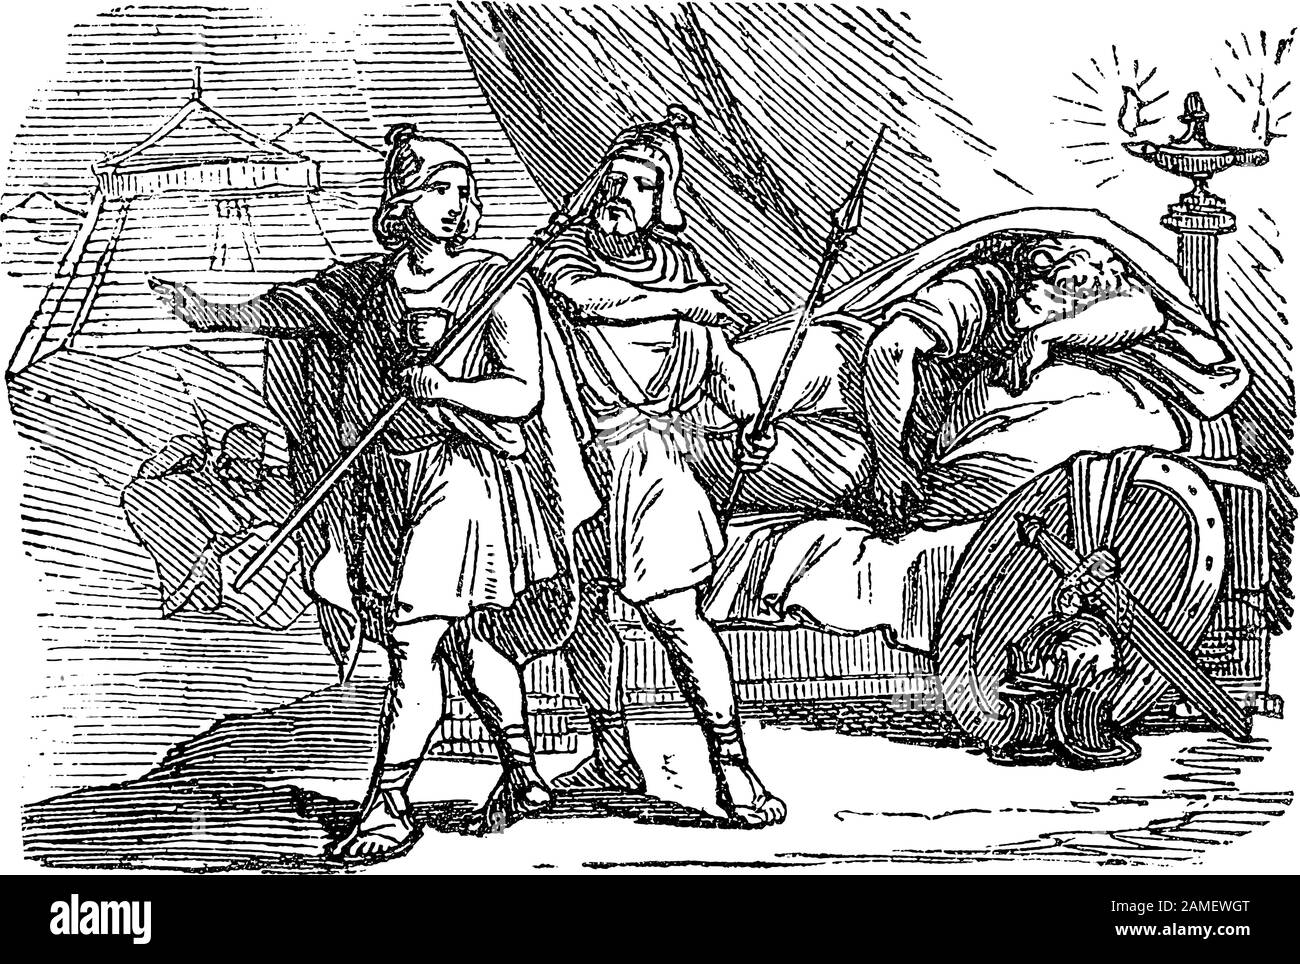 Vintage drawing or engraving of biblical story of David and Abishai spares life of sleeping king Saul in his camp and taking spear instead.Bible, Old Testament,1 Samuel 26. Biblische Geschichte , Germany 1859. Stock Vector